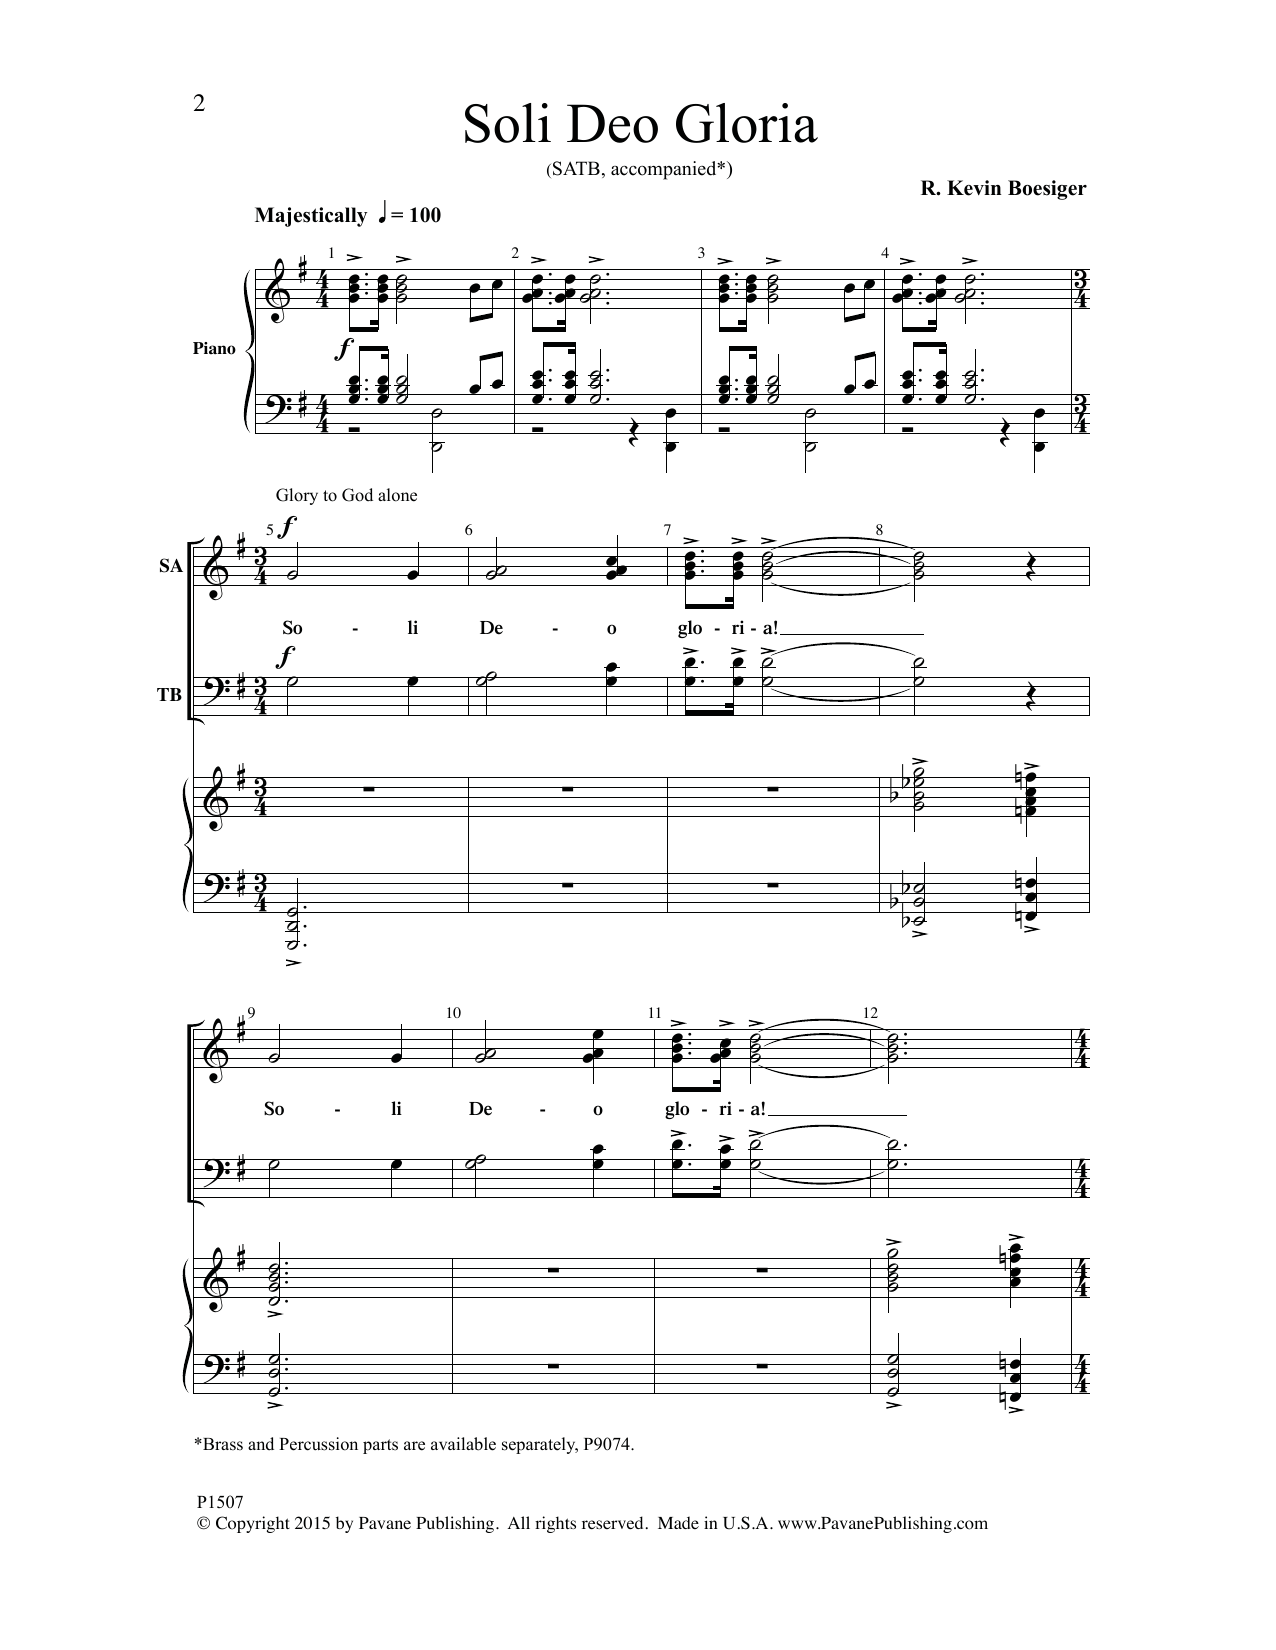 Download R. Kevin Boesiger Soli Deo Gloria Sheet Music